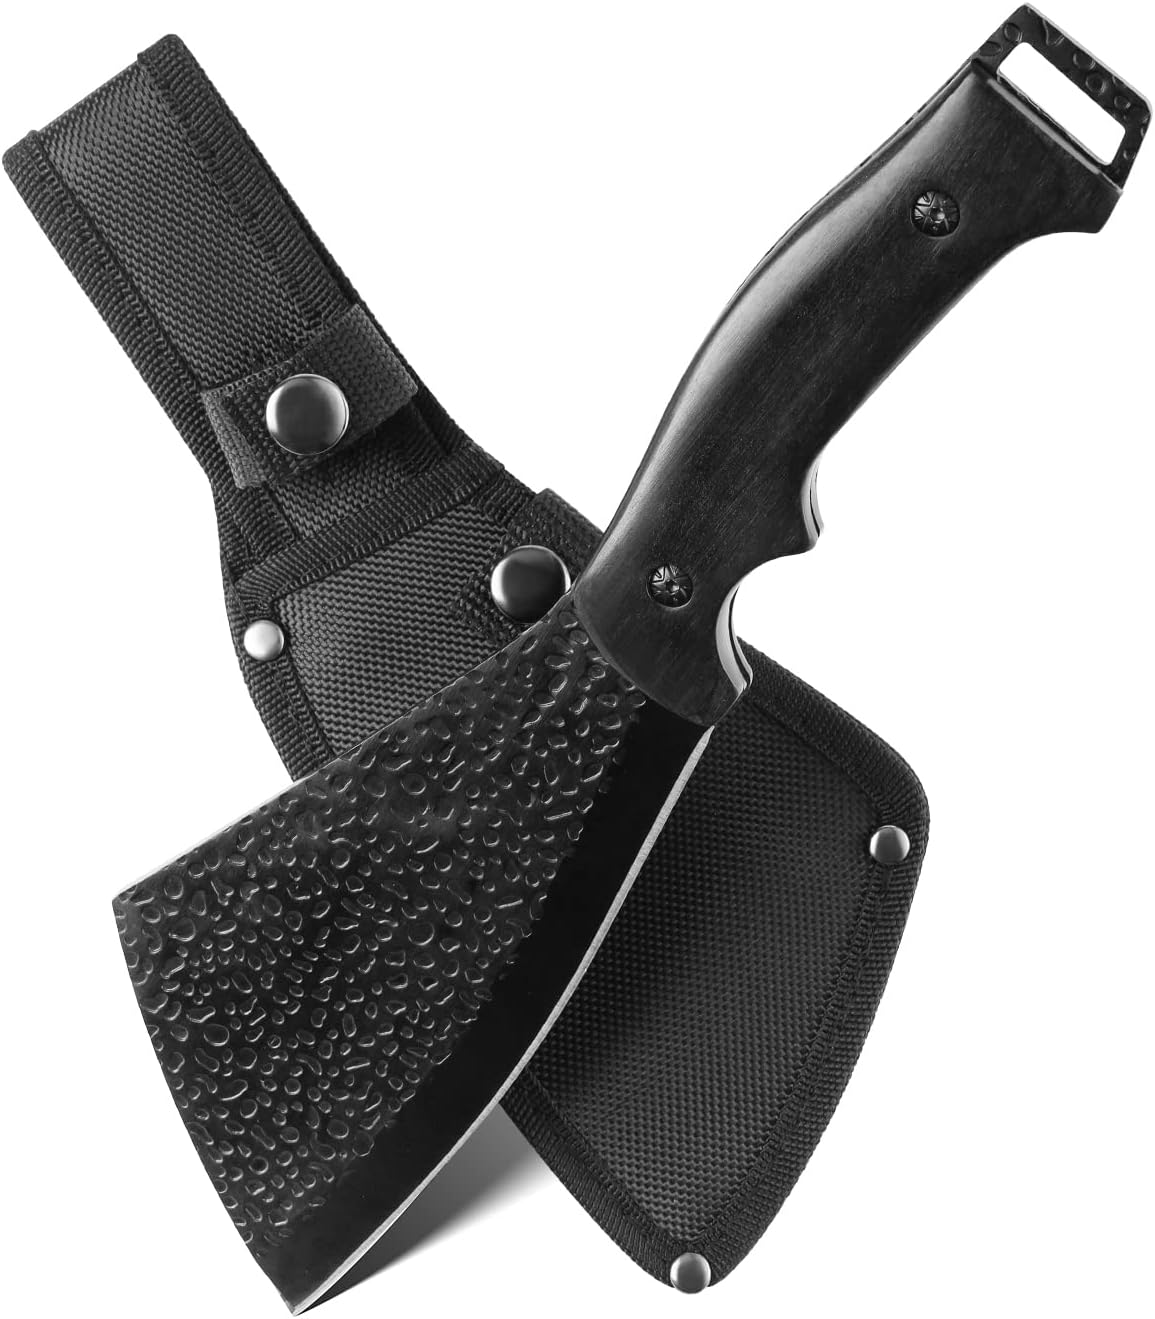 Leopcito 11 Inch Hatchet with Sheath, Small Compact [...]